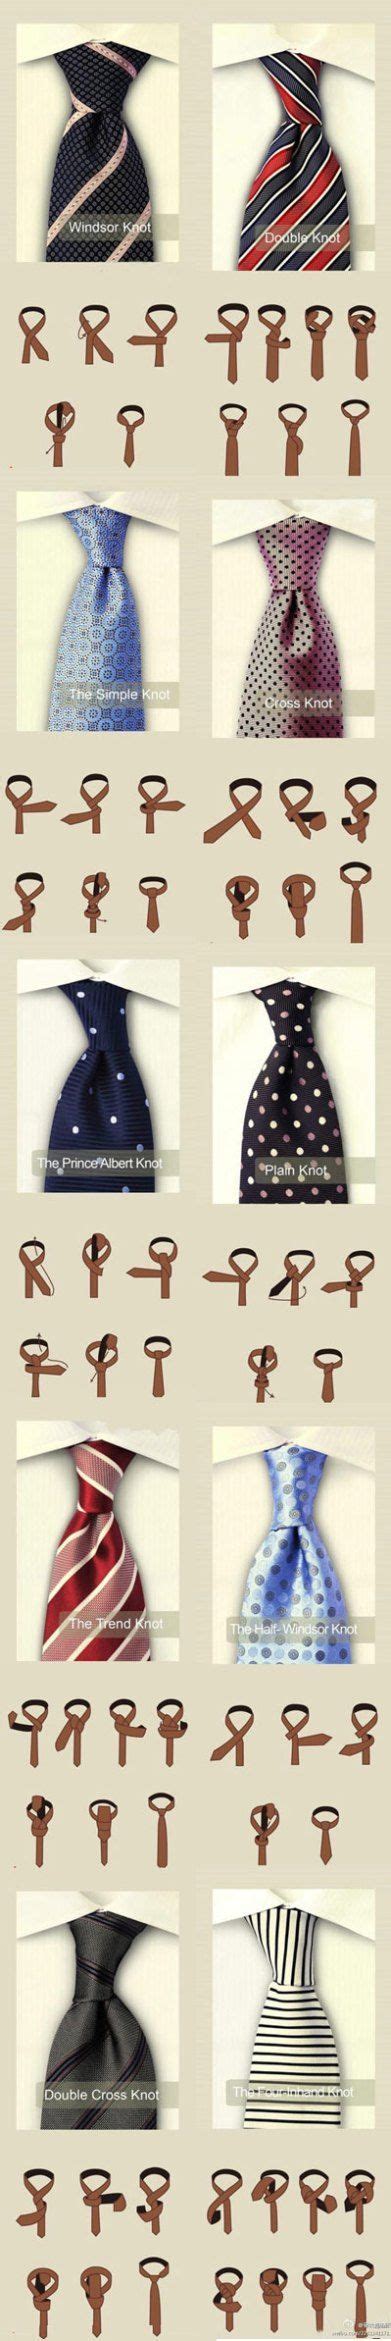 Different Ways To Tie A Necktie Are You Going To A Wedding